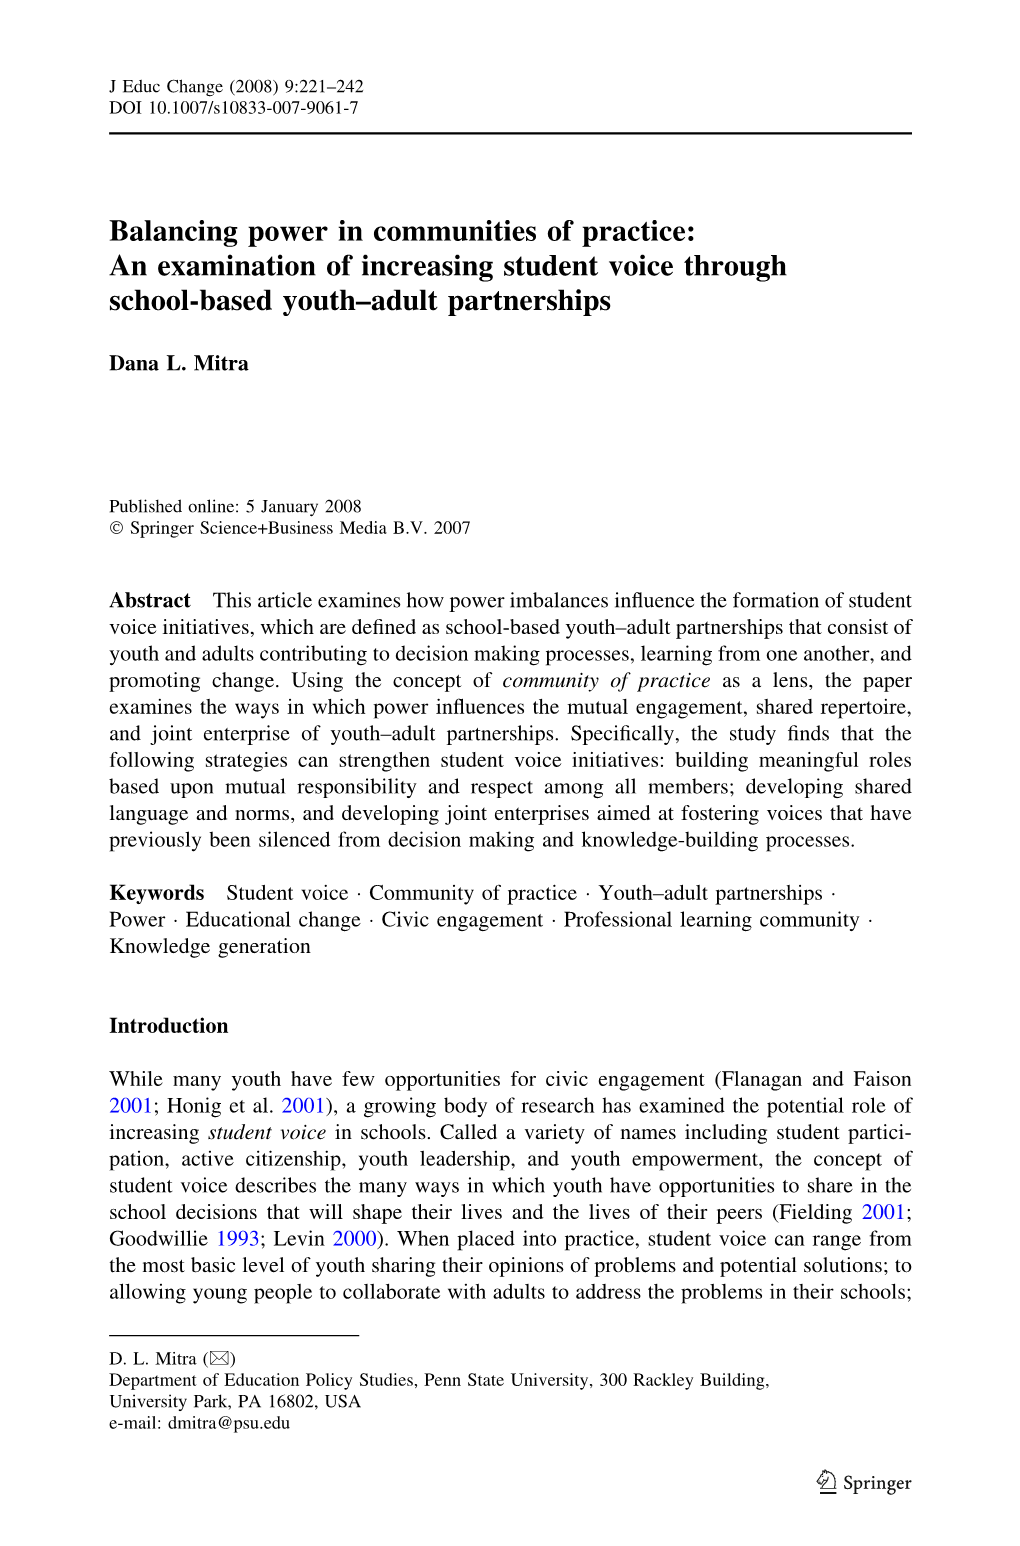 An Examination of Increasing Student Voice Through School-Based Youth–Adult Partnerships